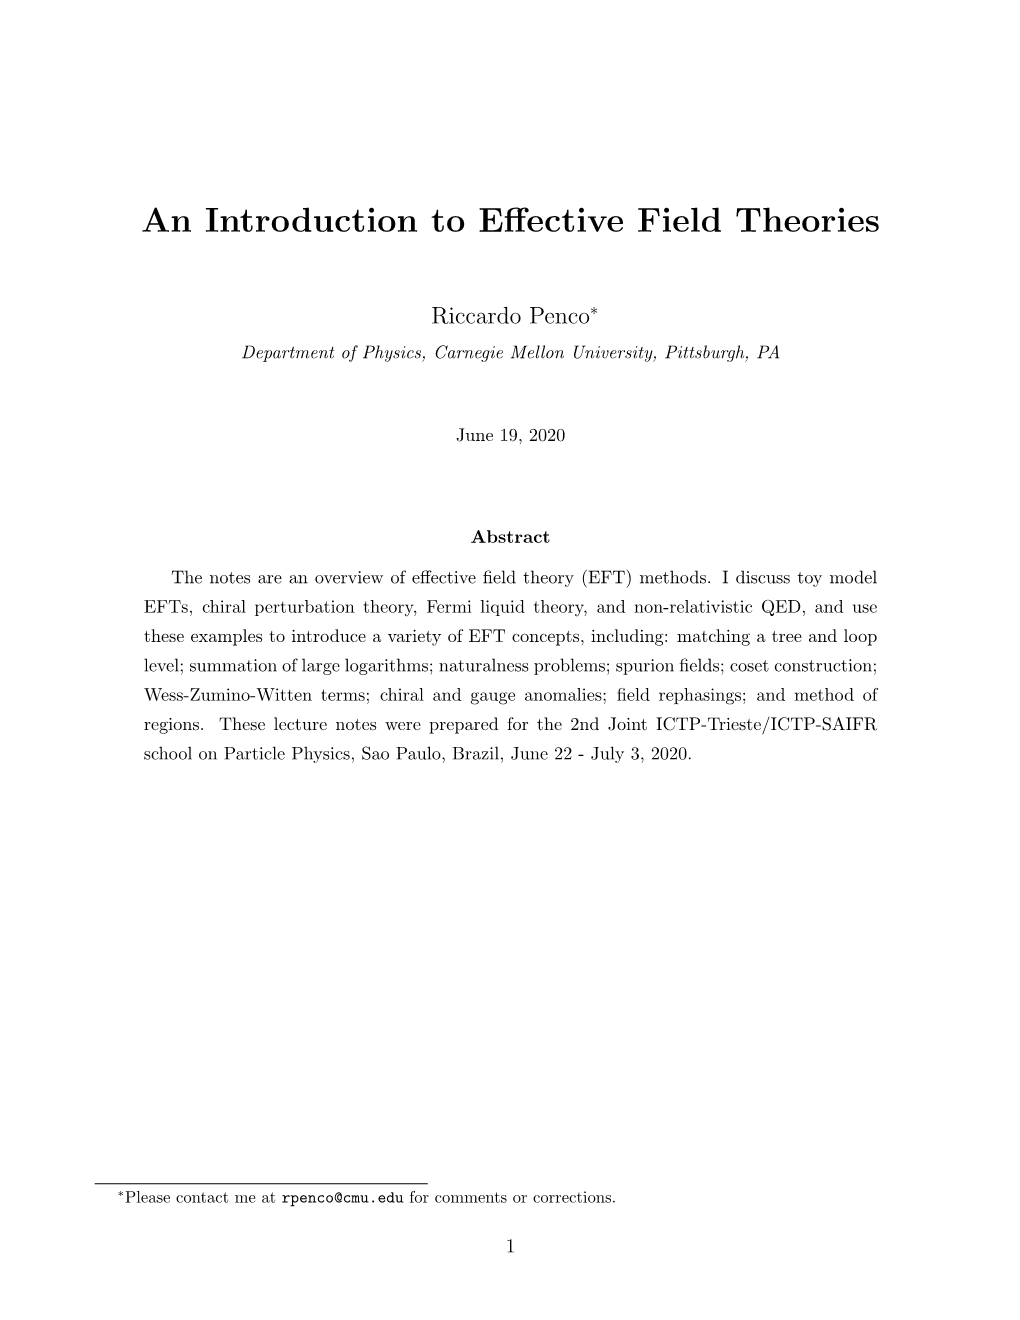 An Introduction to Effective Field Theories